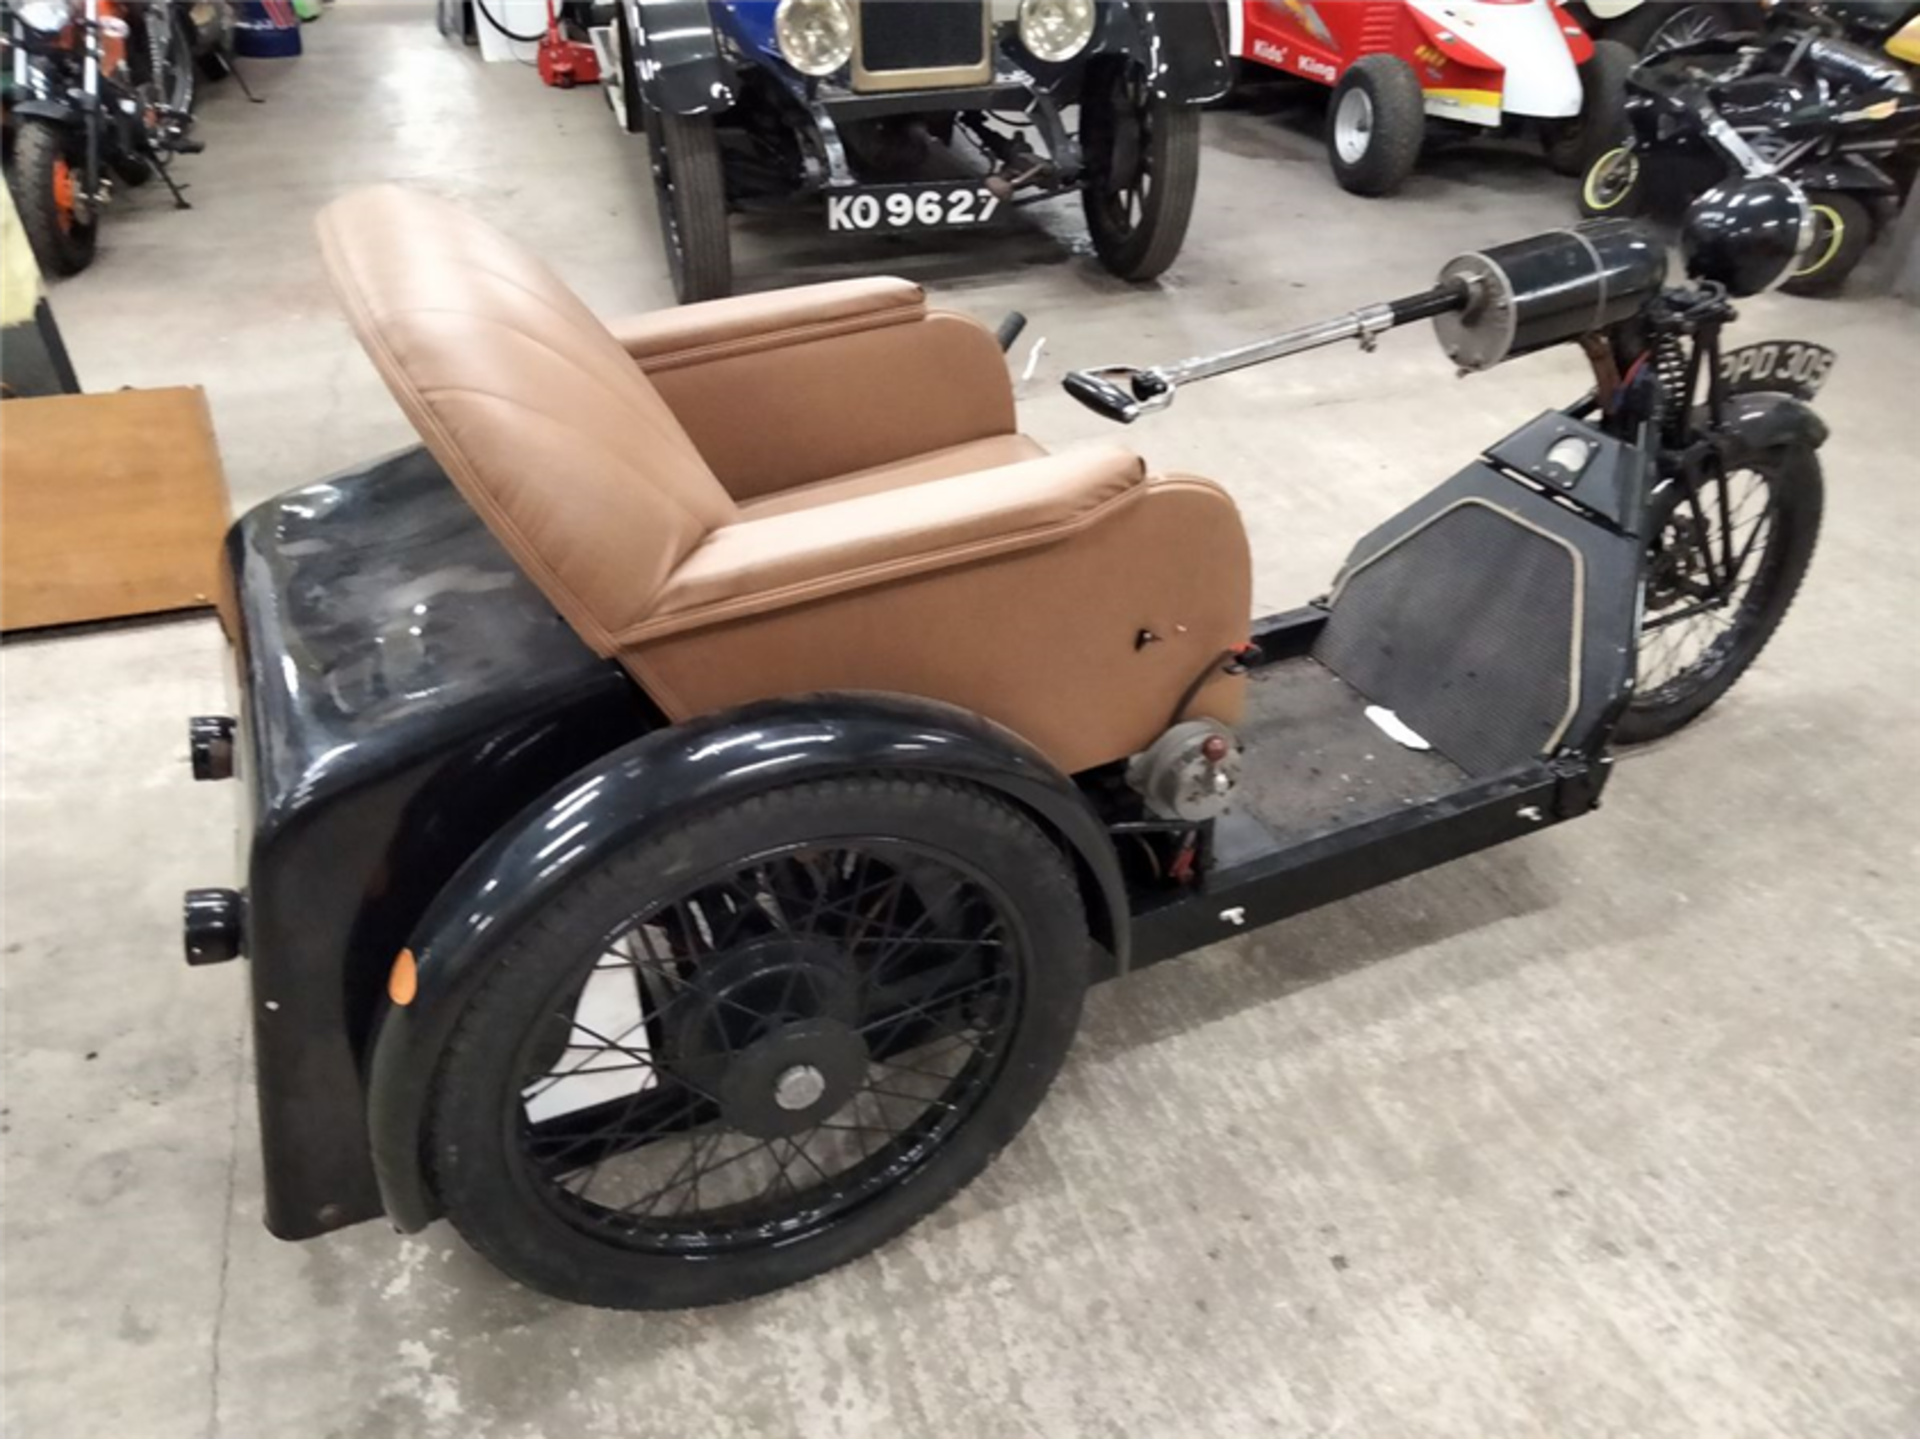 ARGSON OLD MOBILITY SCOOTER